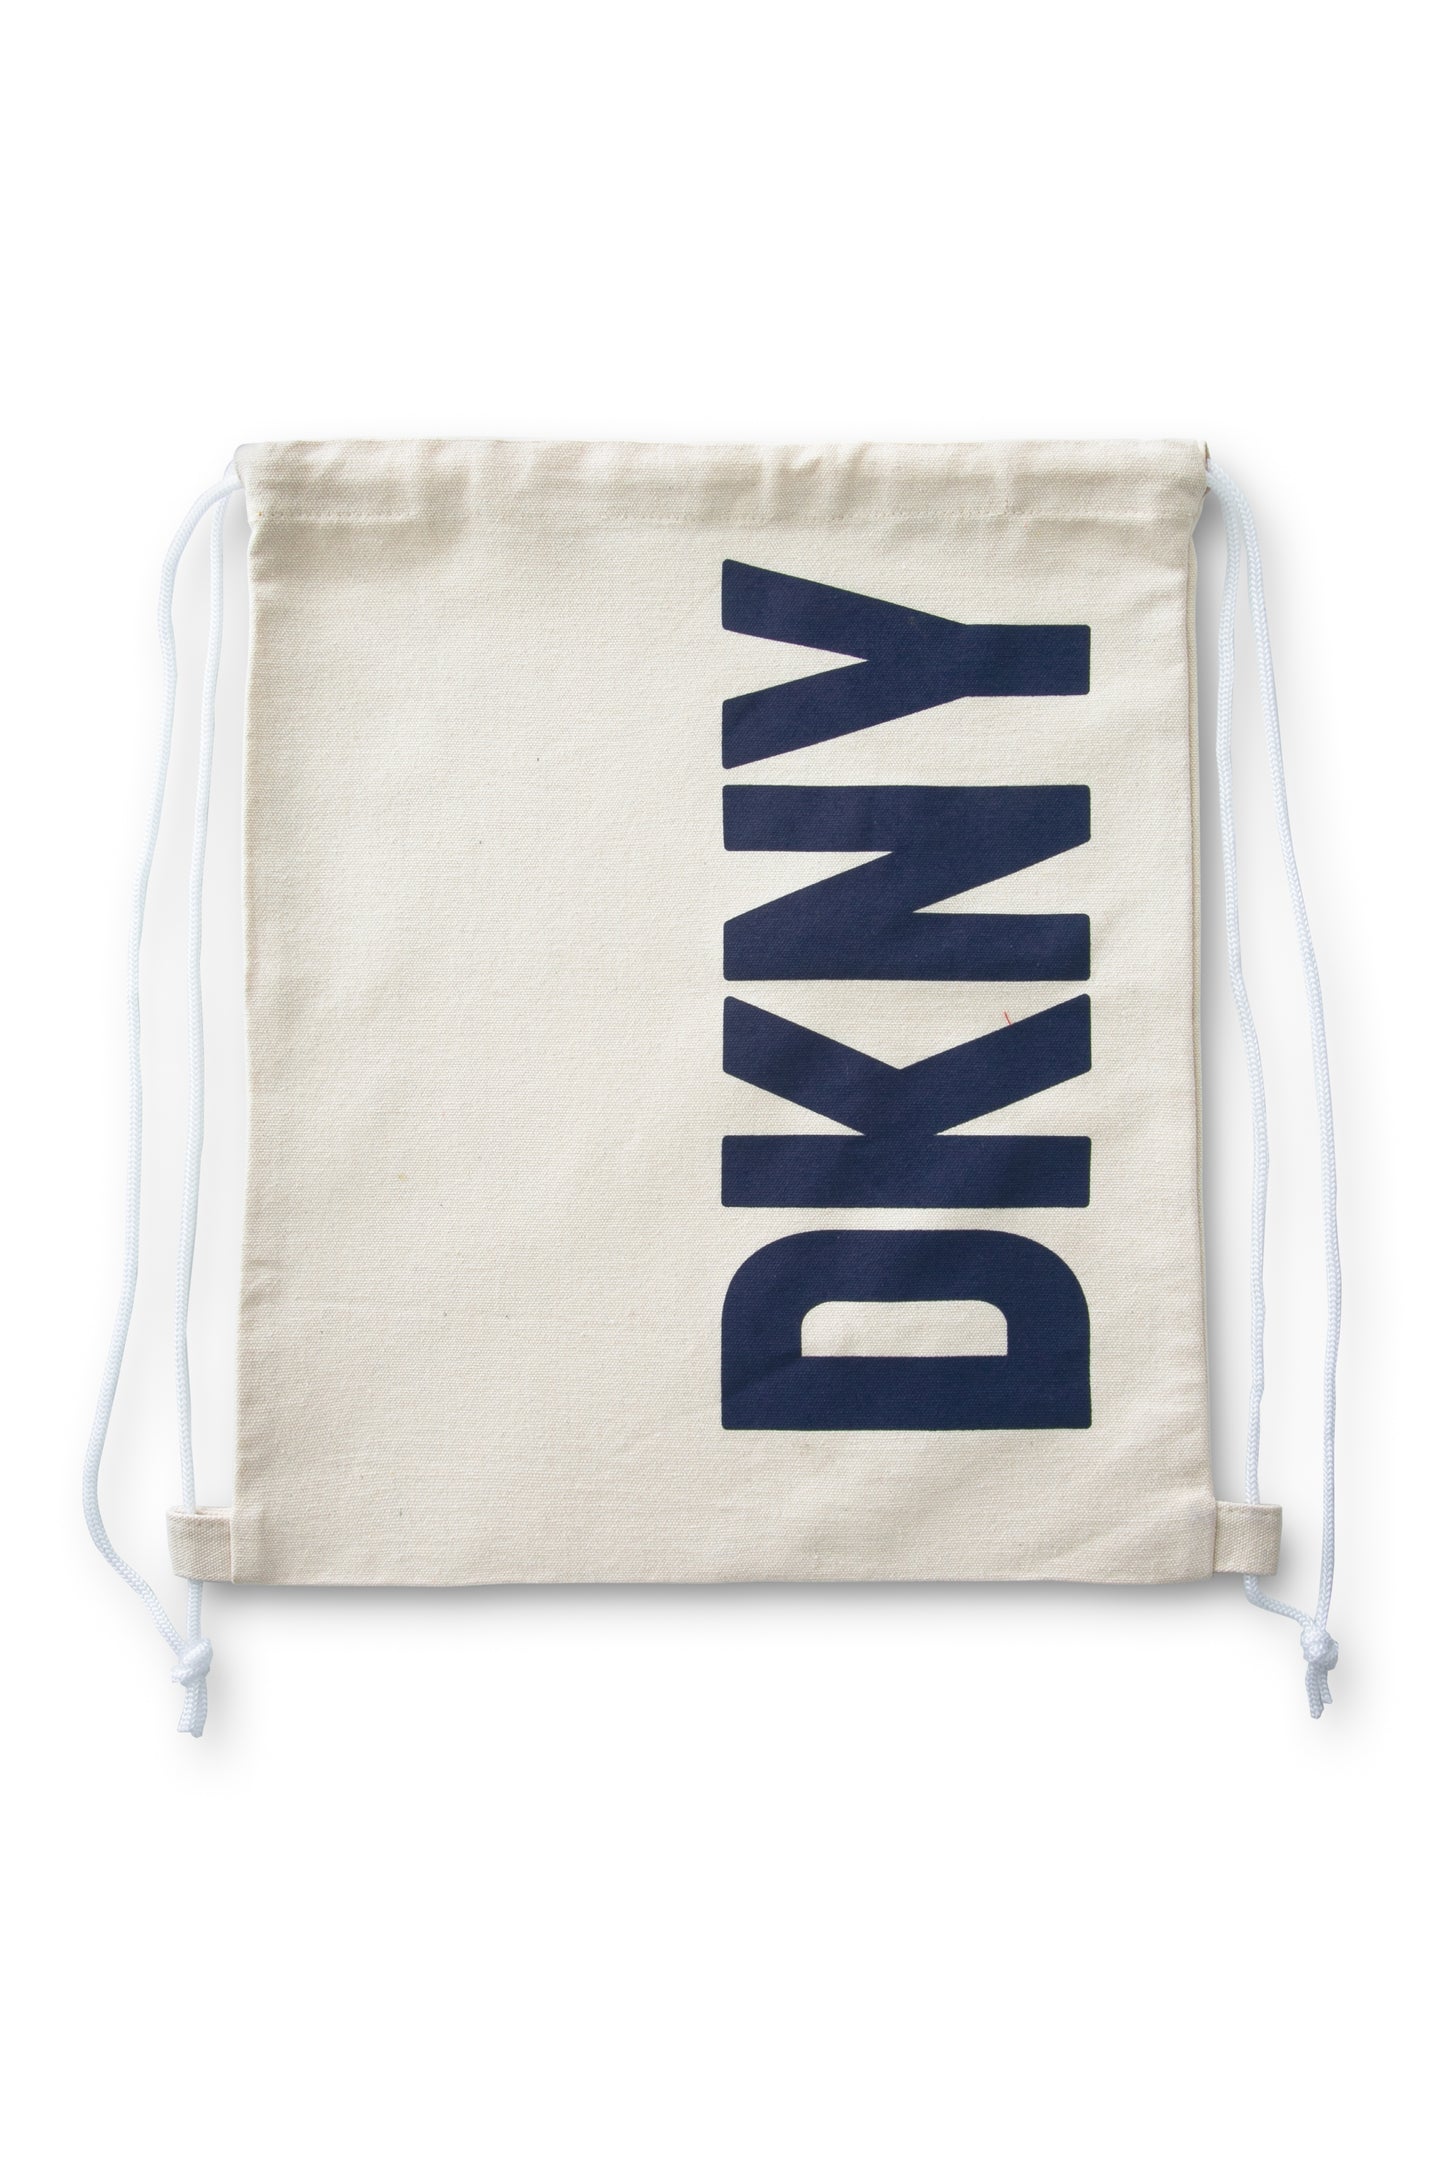 DKNY String Bag - Free Gift with Purchase